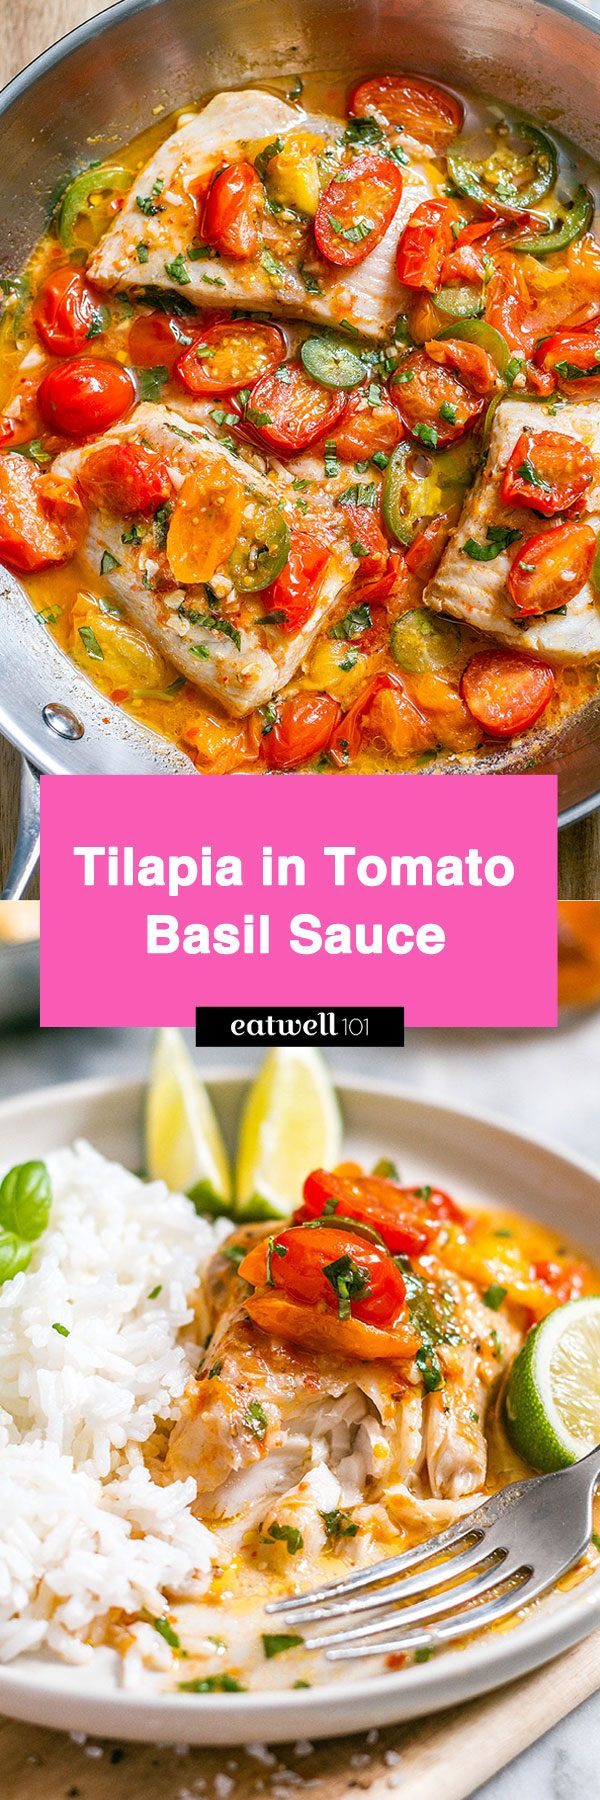 Pan-Seared Tilapia in Tomato Basil Sauce - #fish #recipe #eatwell101 - Light and delicious, made in 25 min, all in one pan!